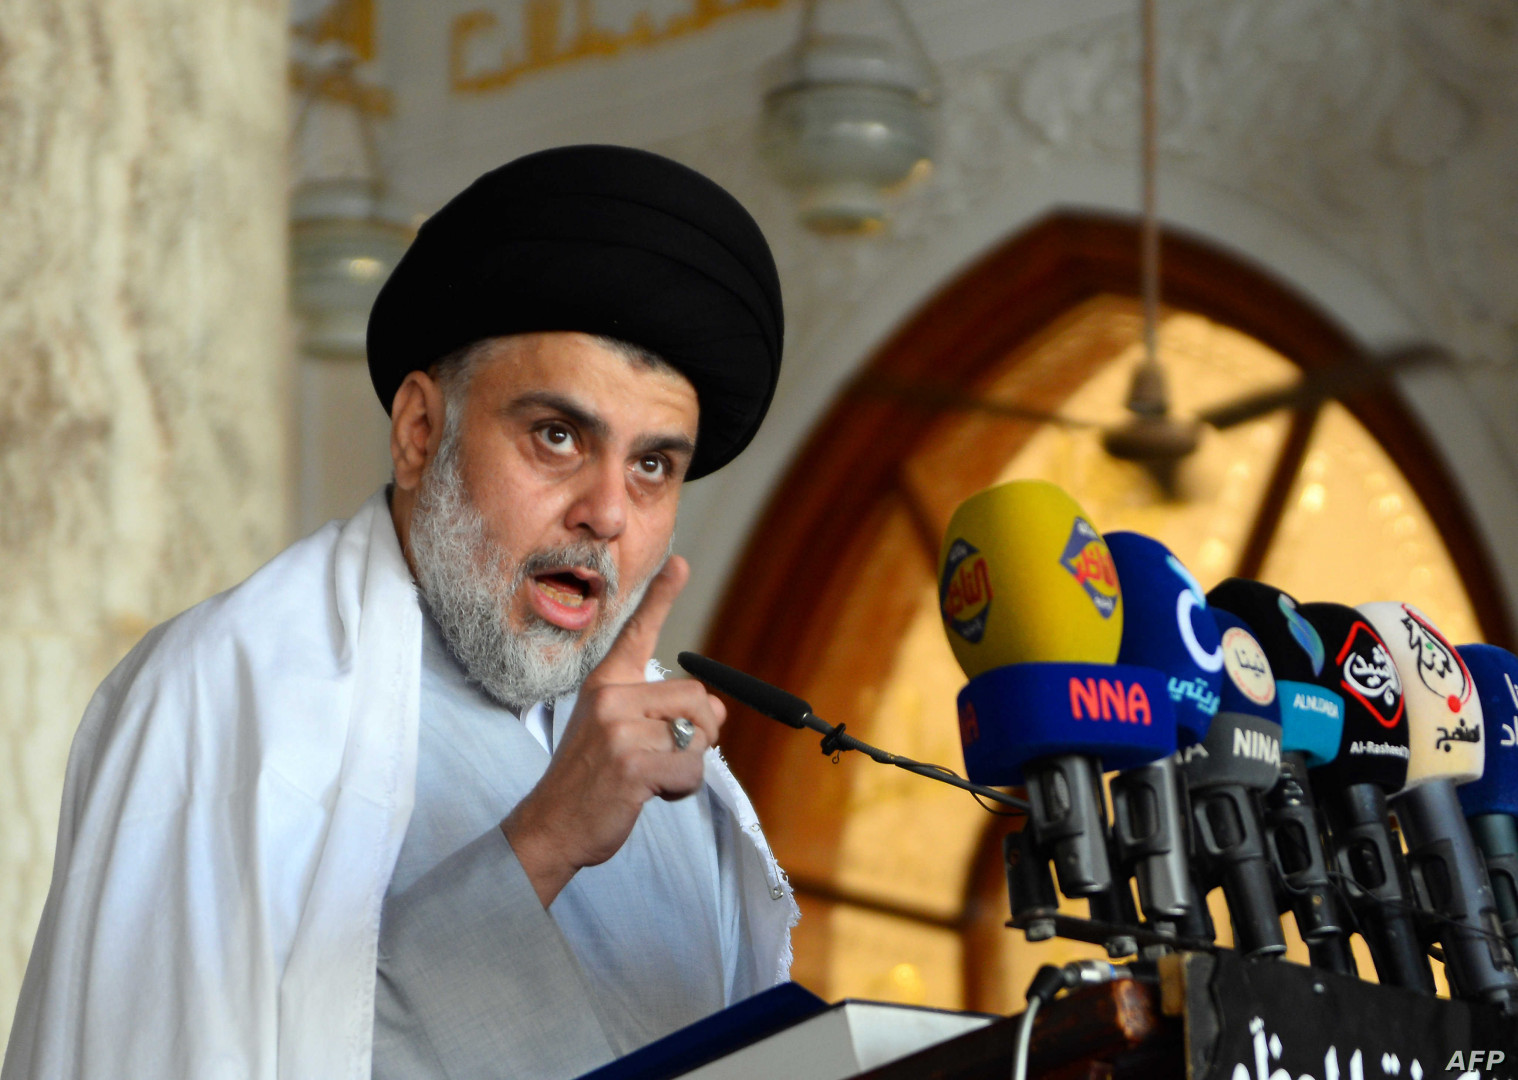 Al-Sadr condemns parties seeking to disturb security in Iraq to delay or cancel the elections